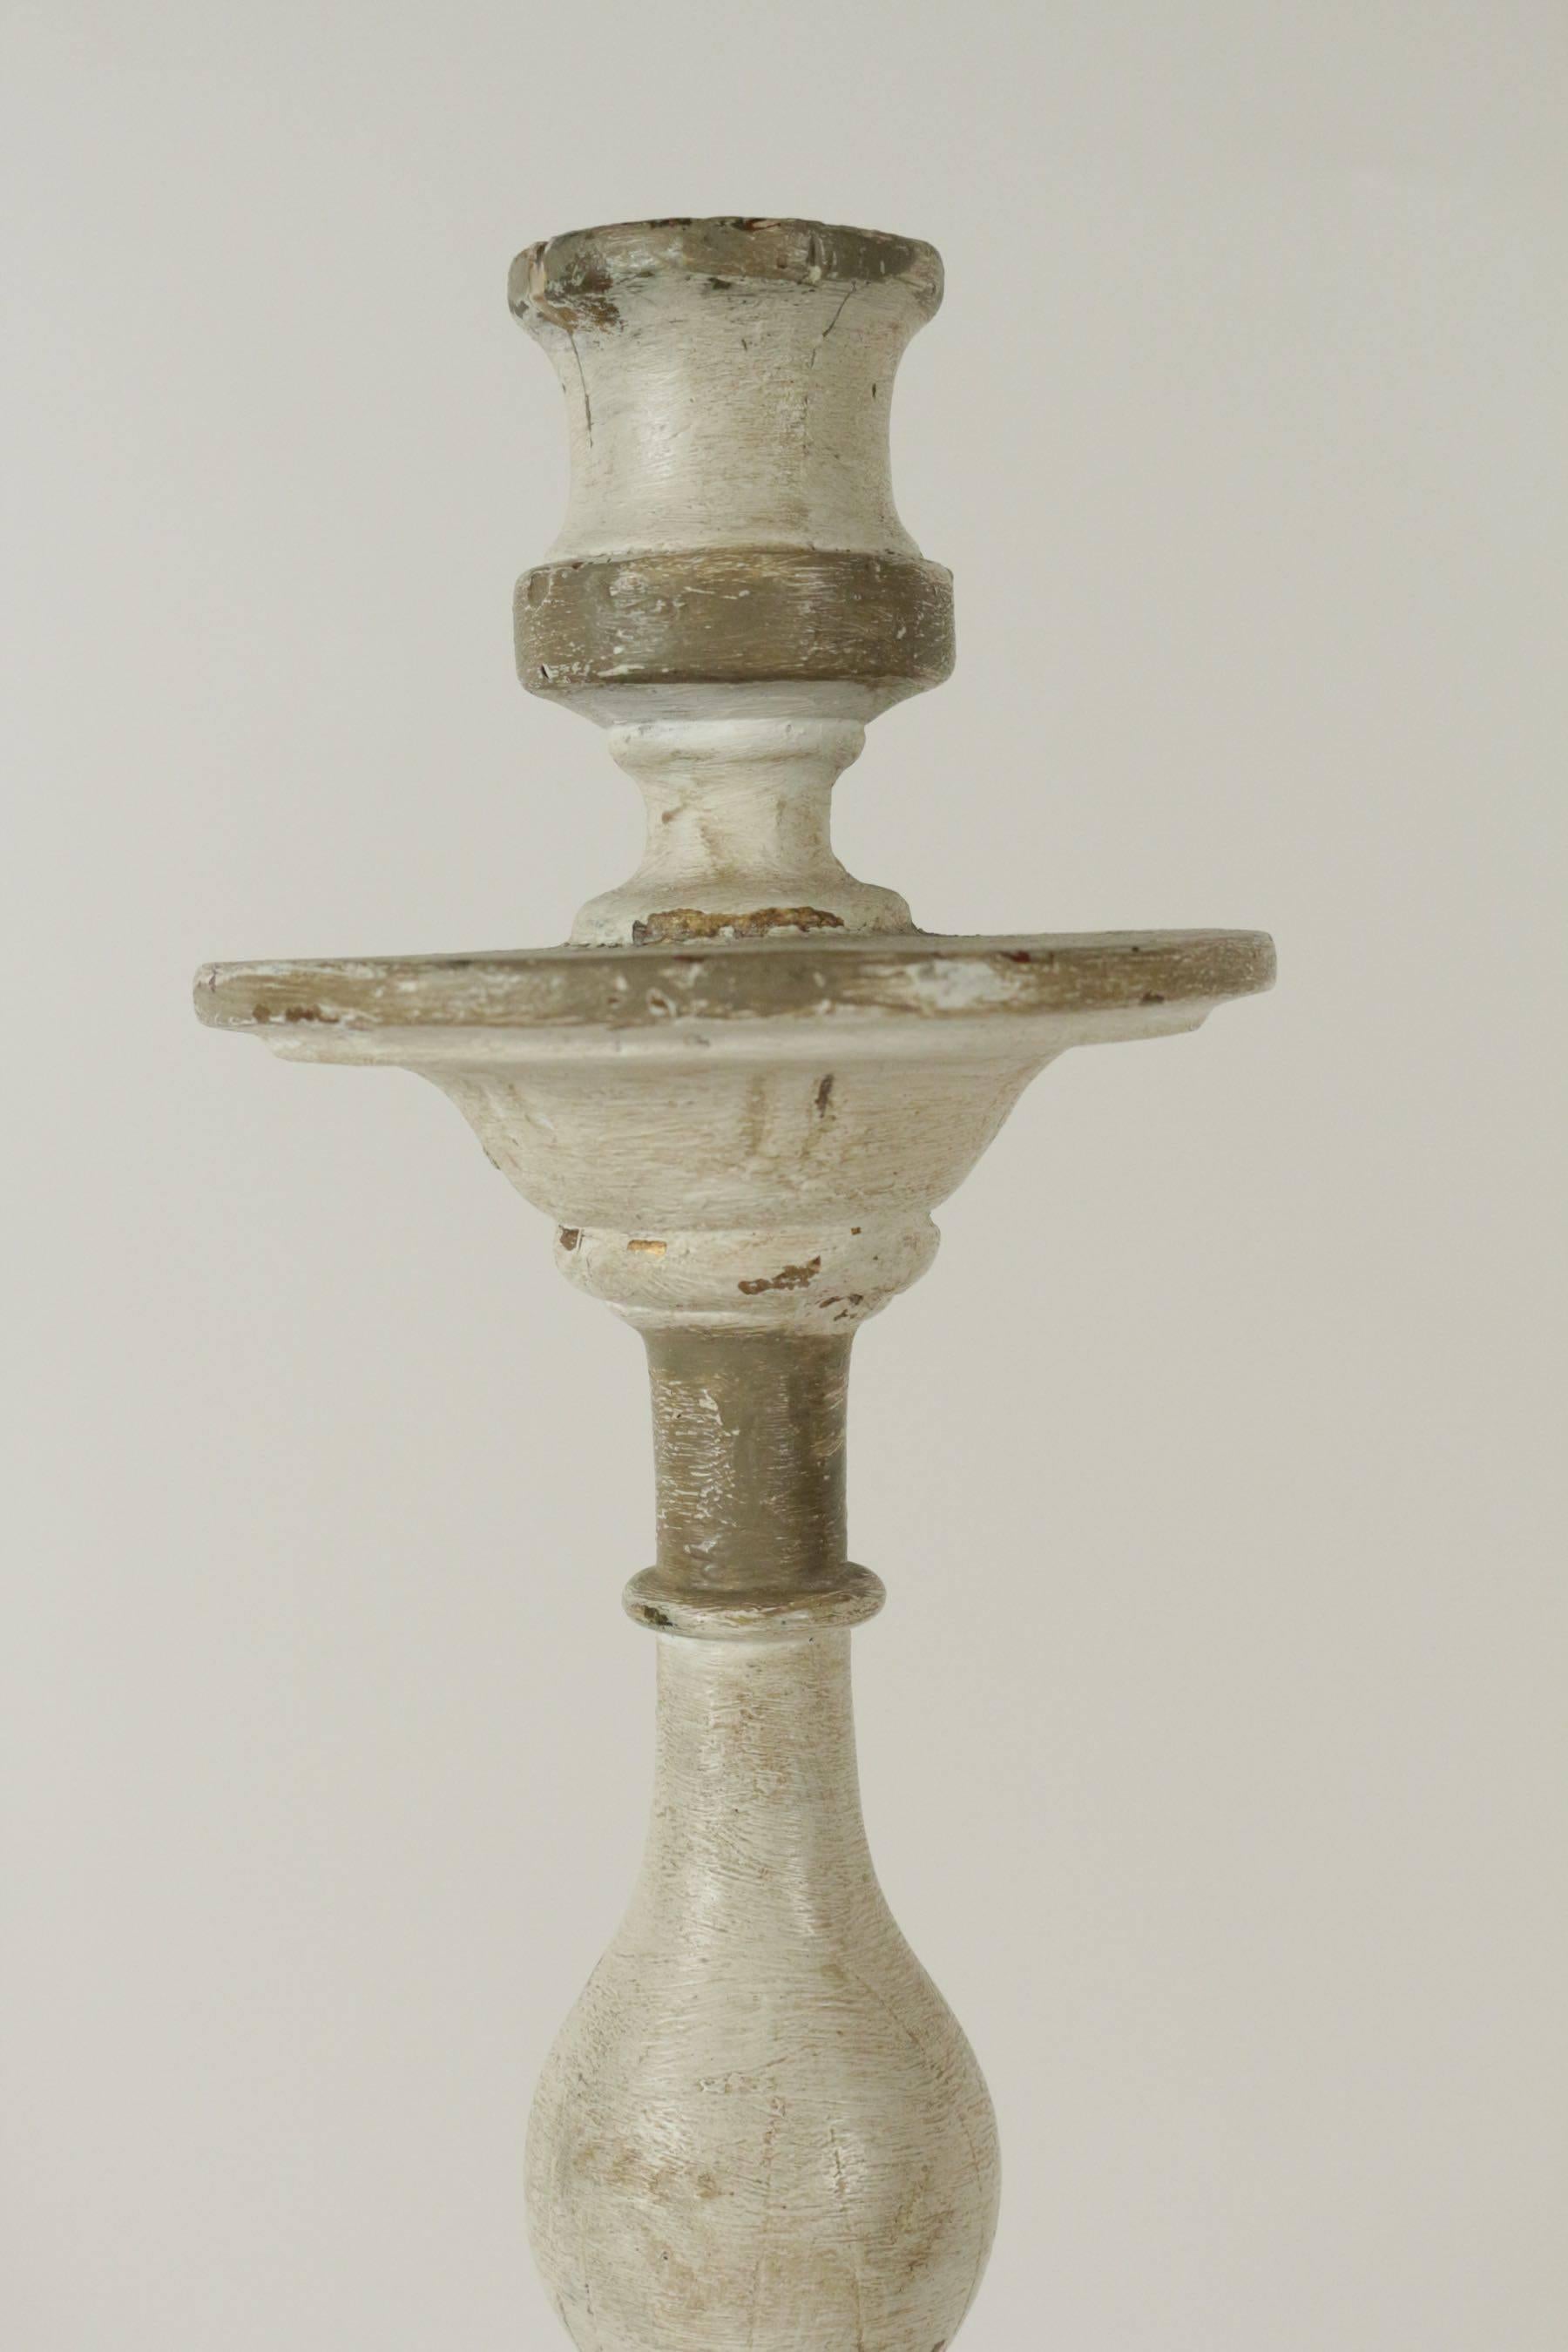 French Candle Stick in Sculpted Wood from the 19th Century Repainted in 20th Century